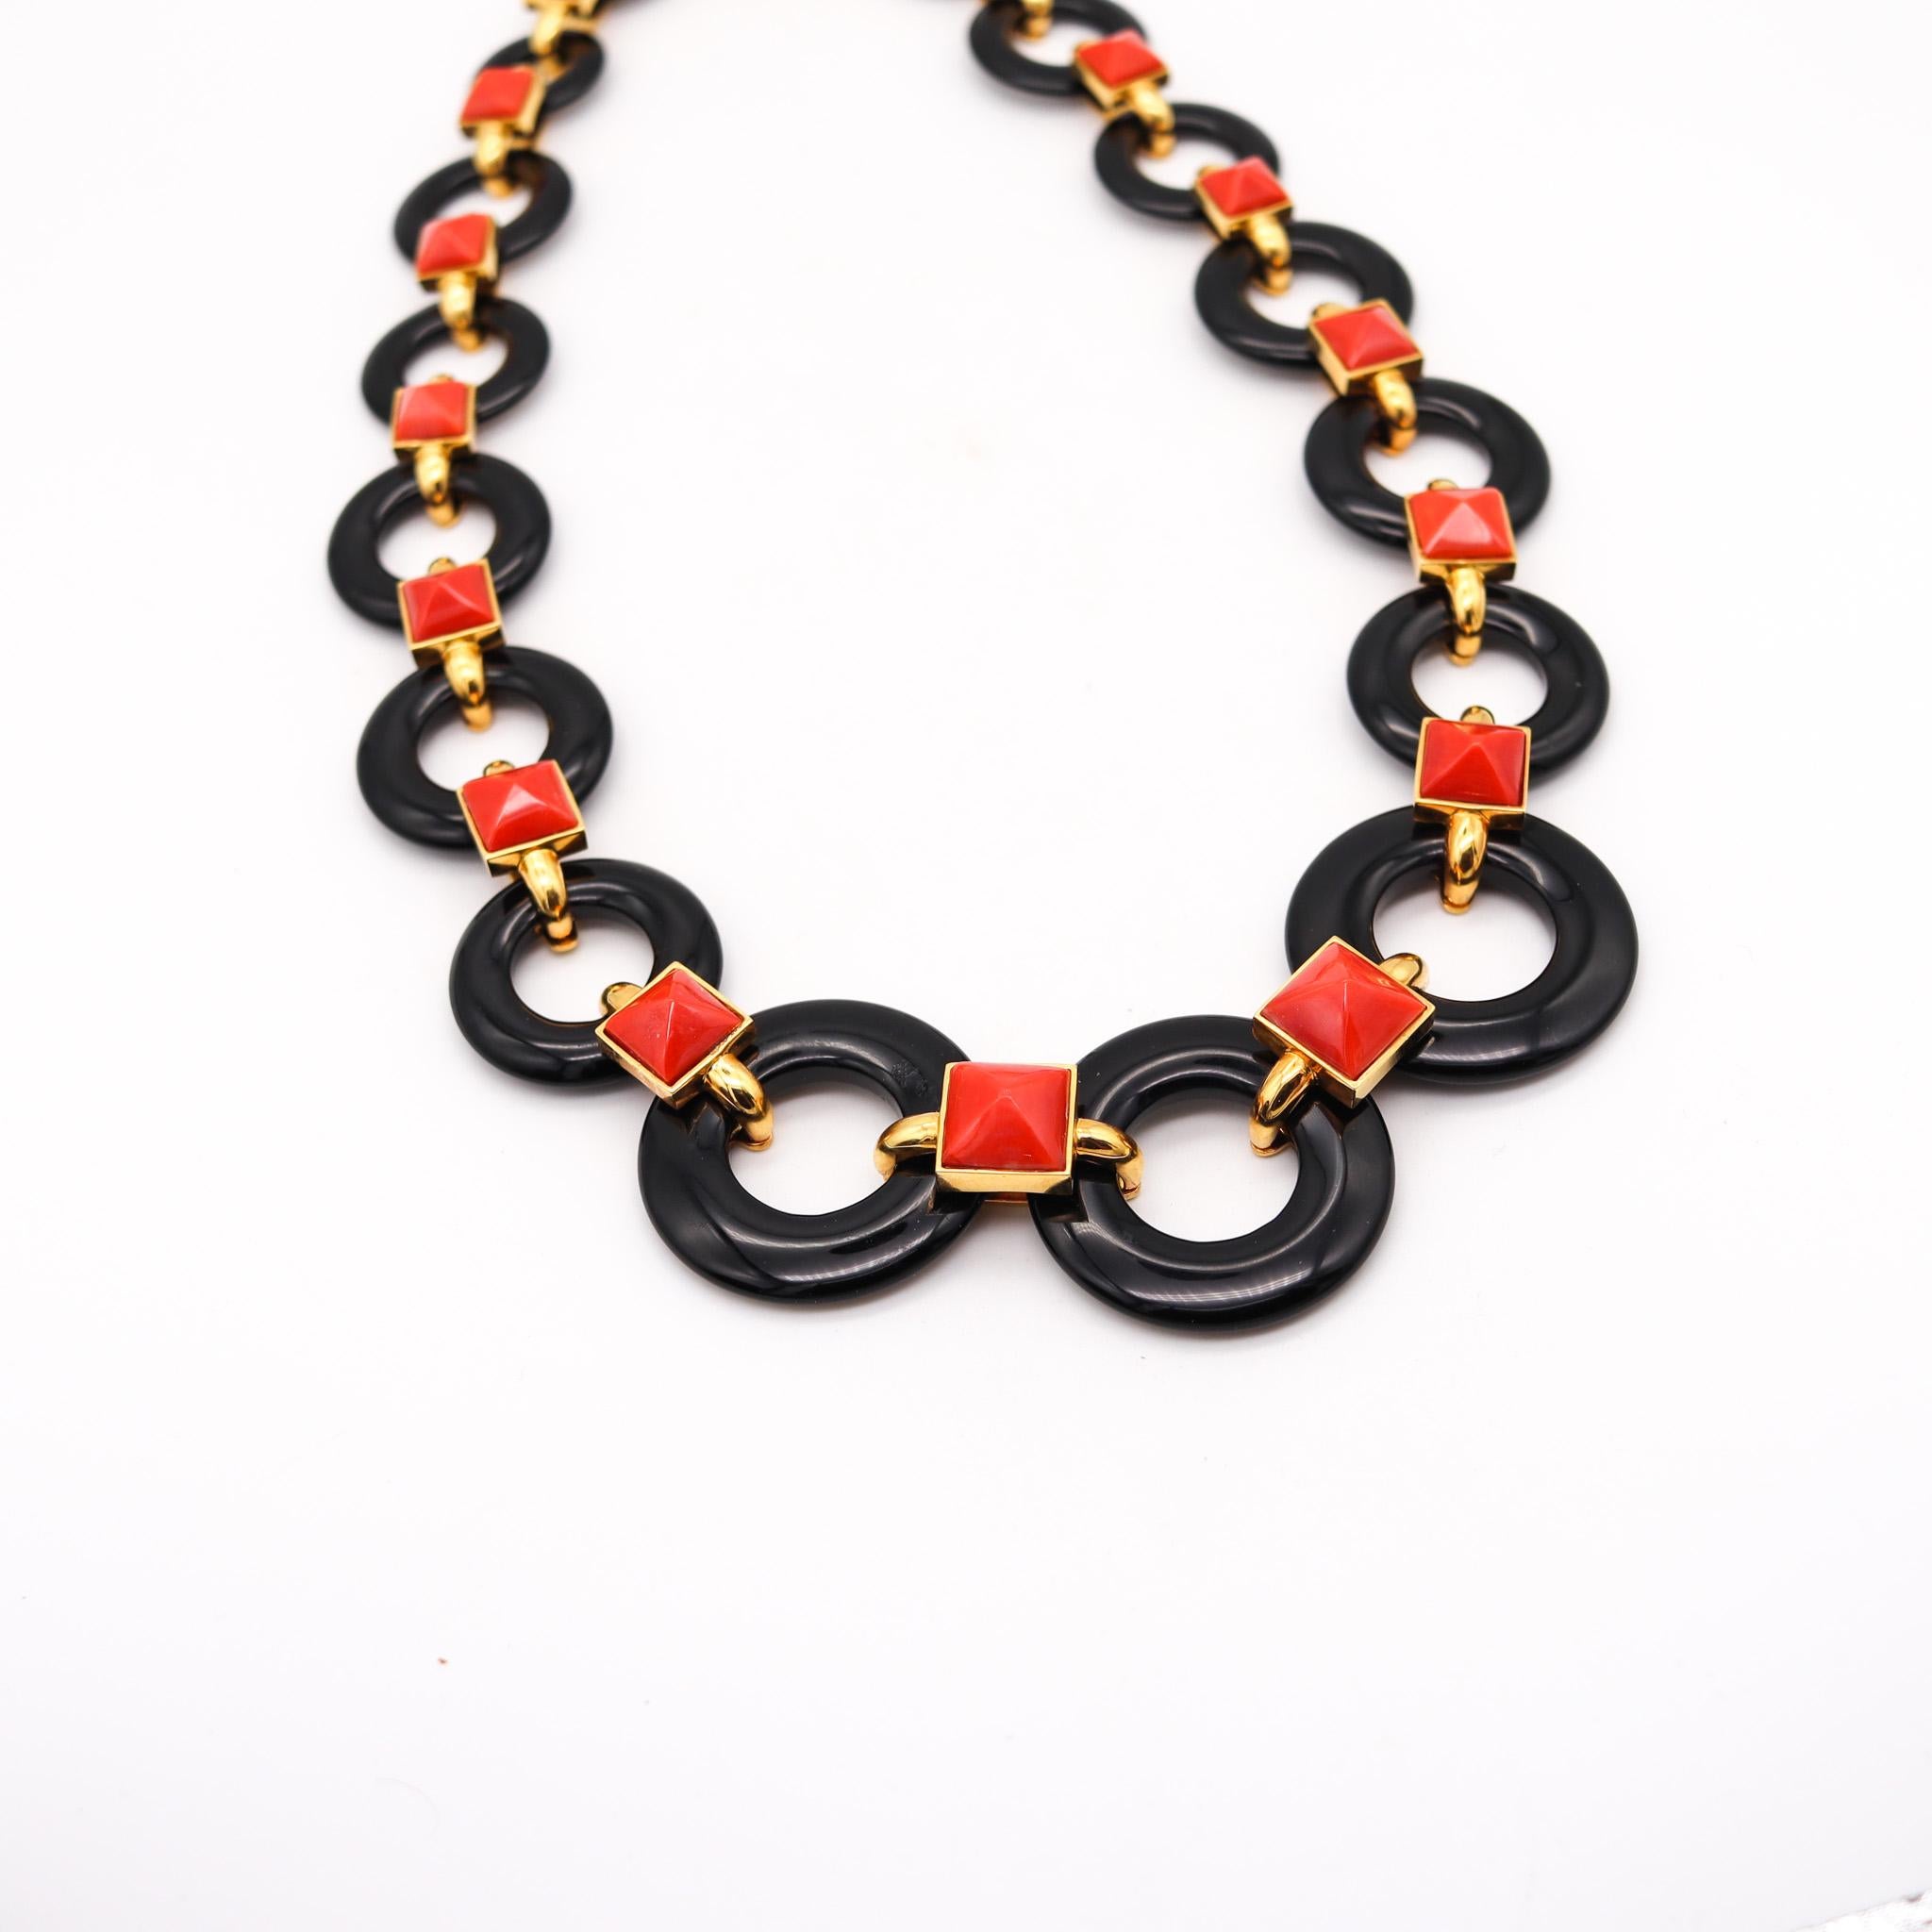 Necklace designed by Aldo Cipullo.

Magnificent and very rare vintage necklace, created In New York city by the iconic master jewelry designer Aldo Cipullo, back in the 1970. This necklace comprises of round onyxes carvings connected by rectangular